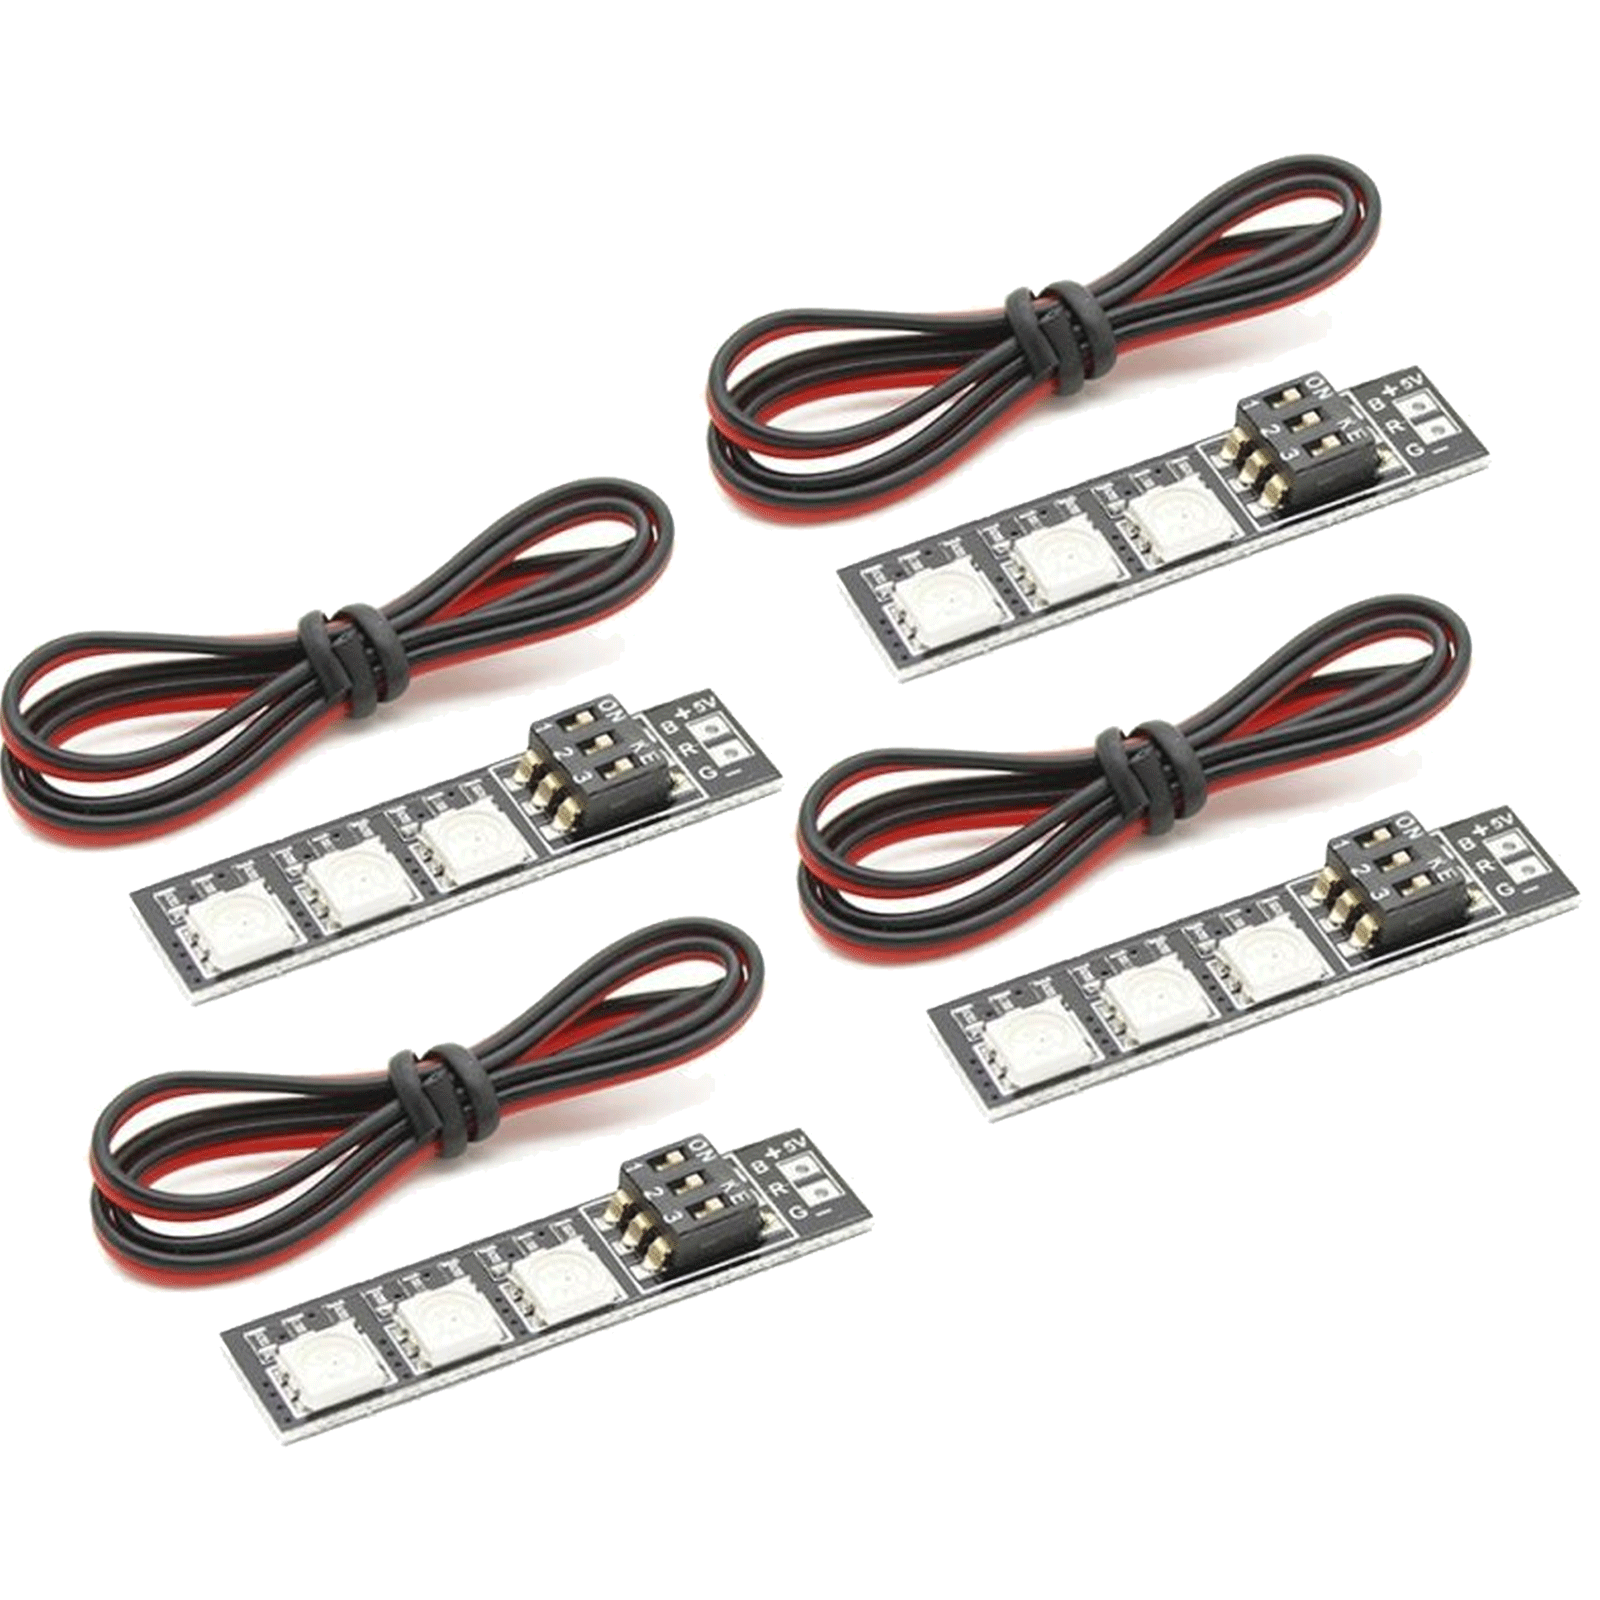 4pcs RGB LED Board Strip for FPV Racing Drones Dip-Select 6-Color